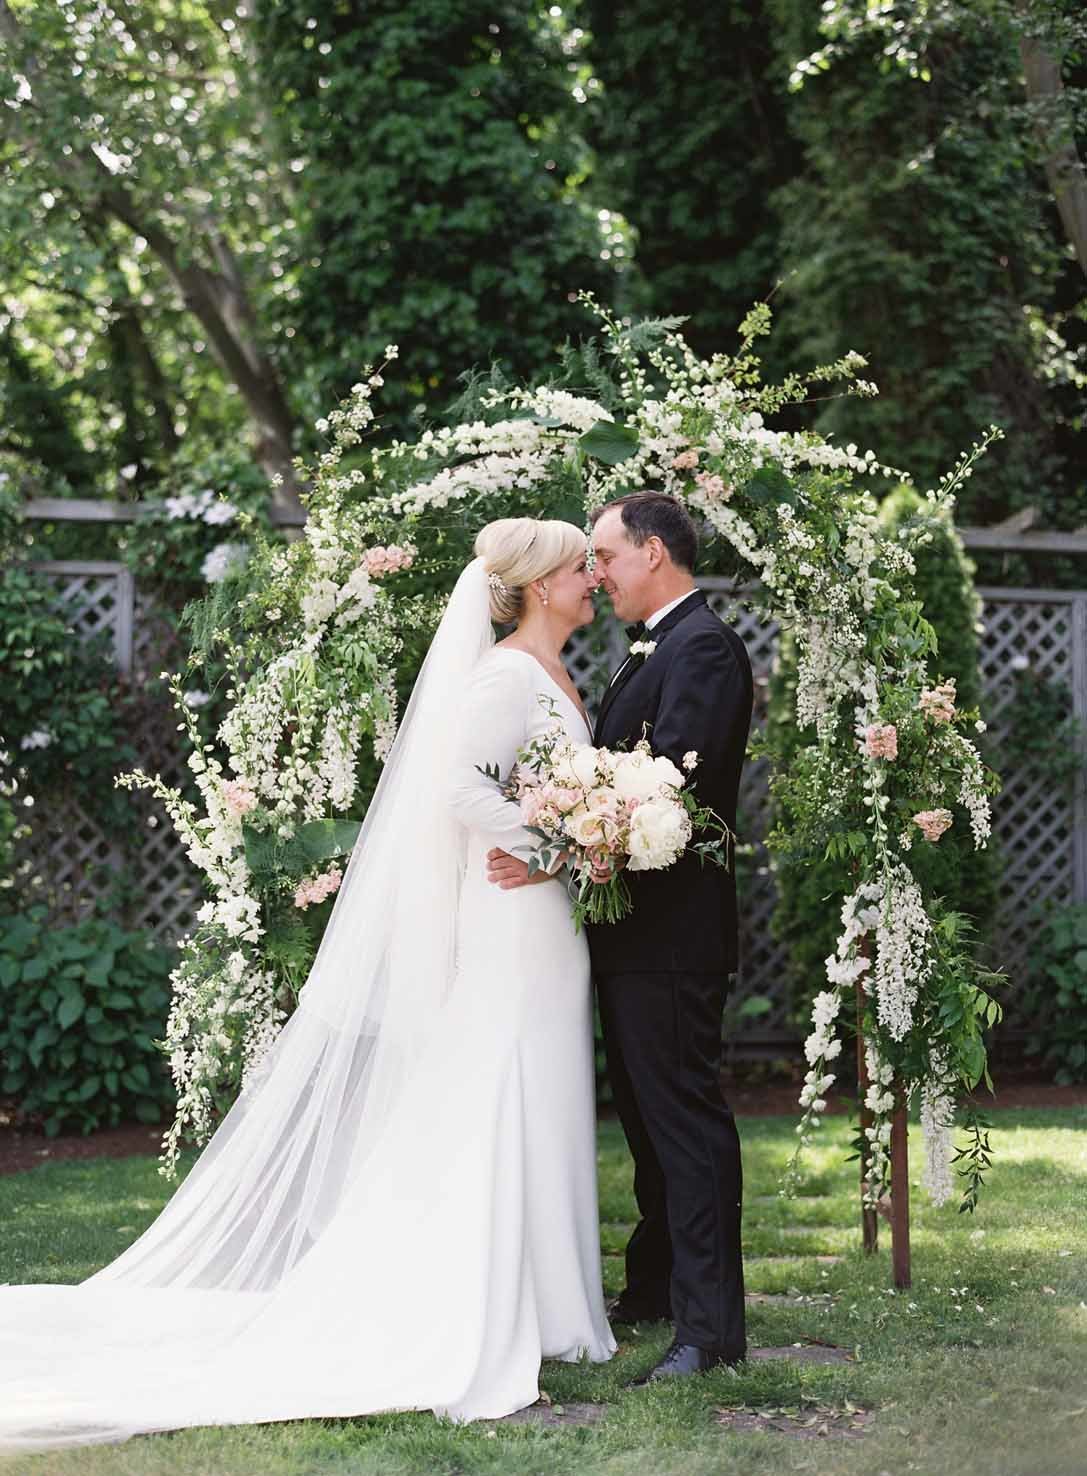 bride and groom in fron to white wedding arbor decorated with white delphinium